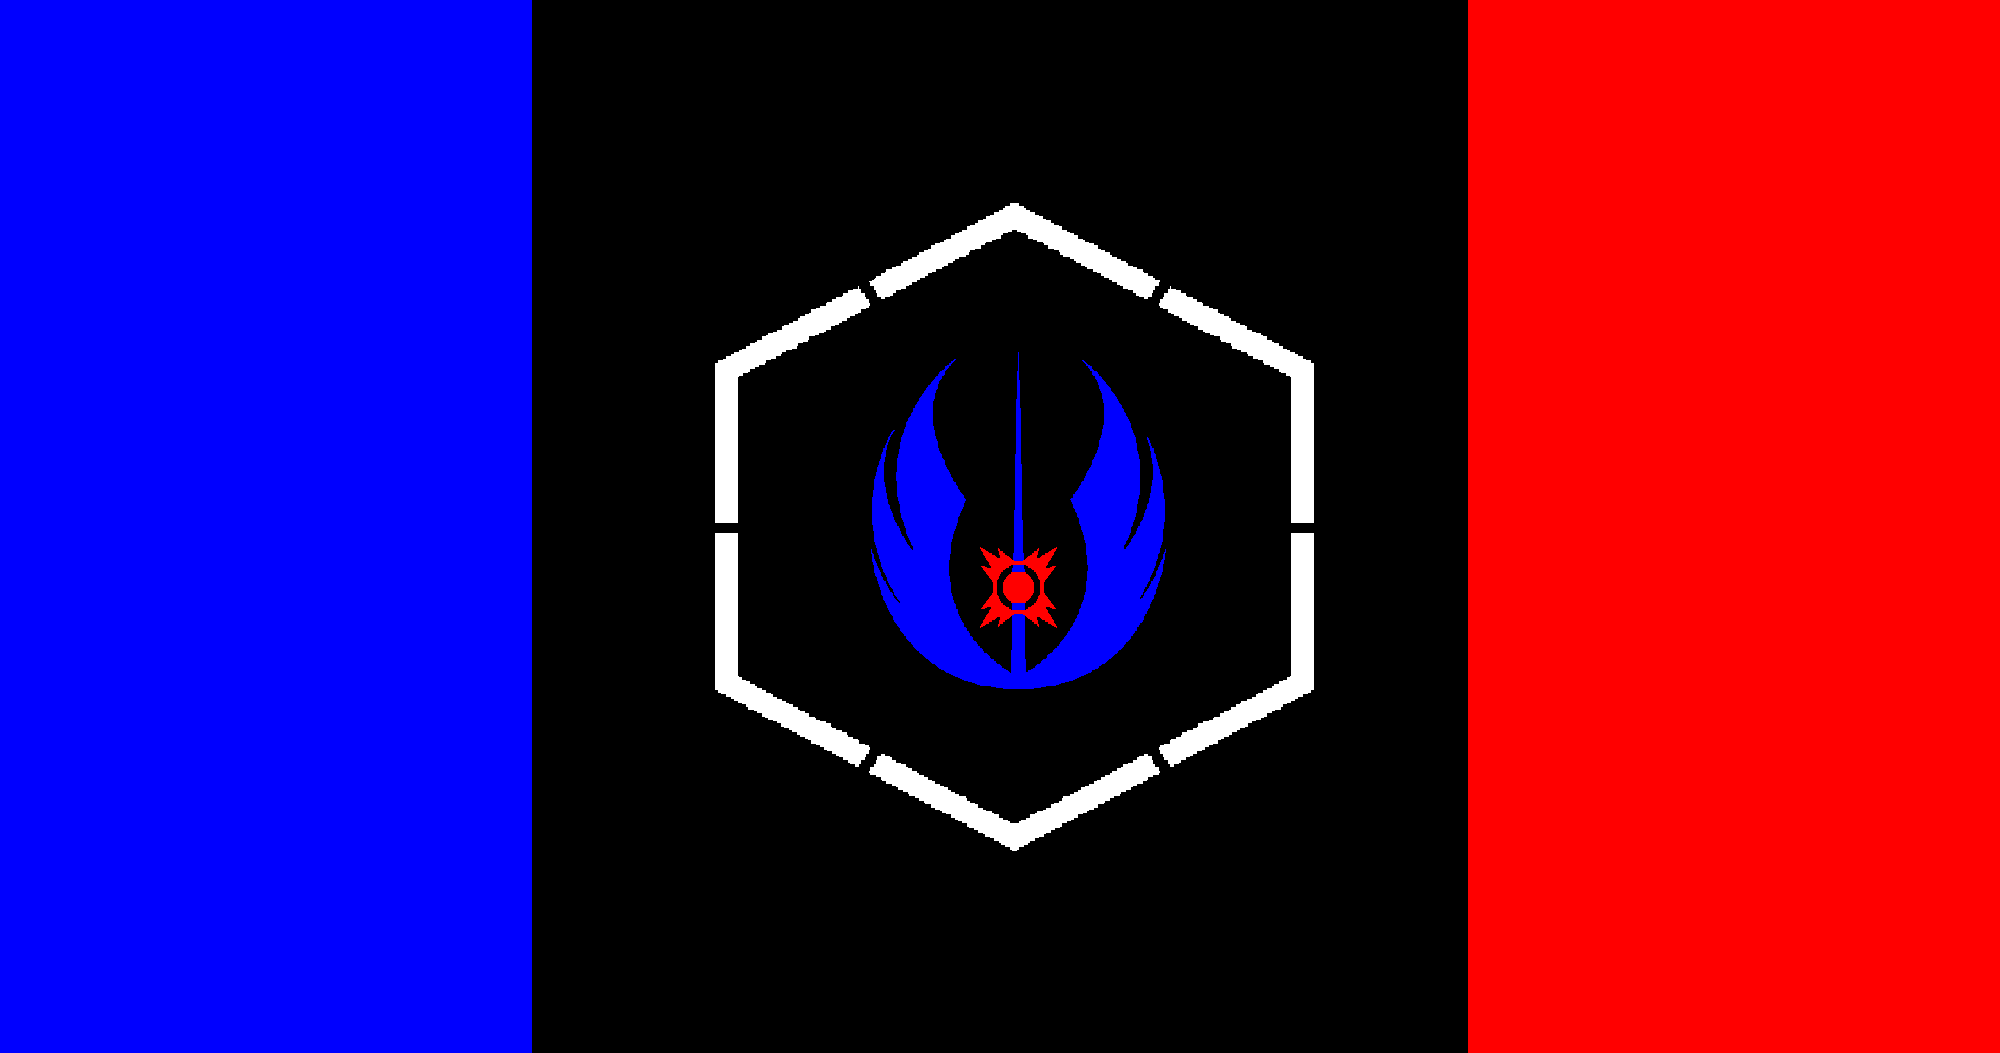 The Jedi Sith Empire by drivanmoffitt on